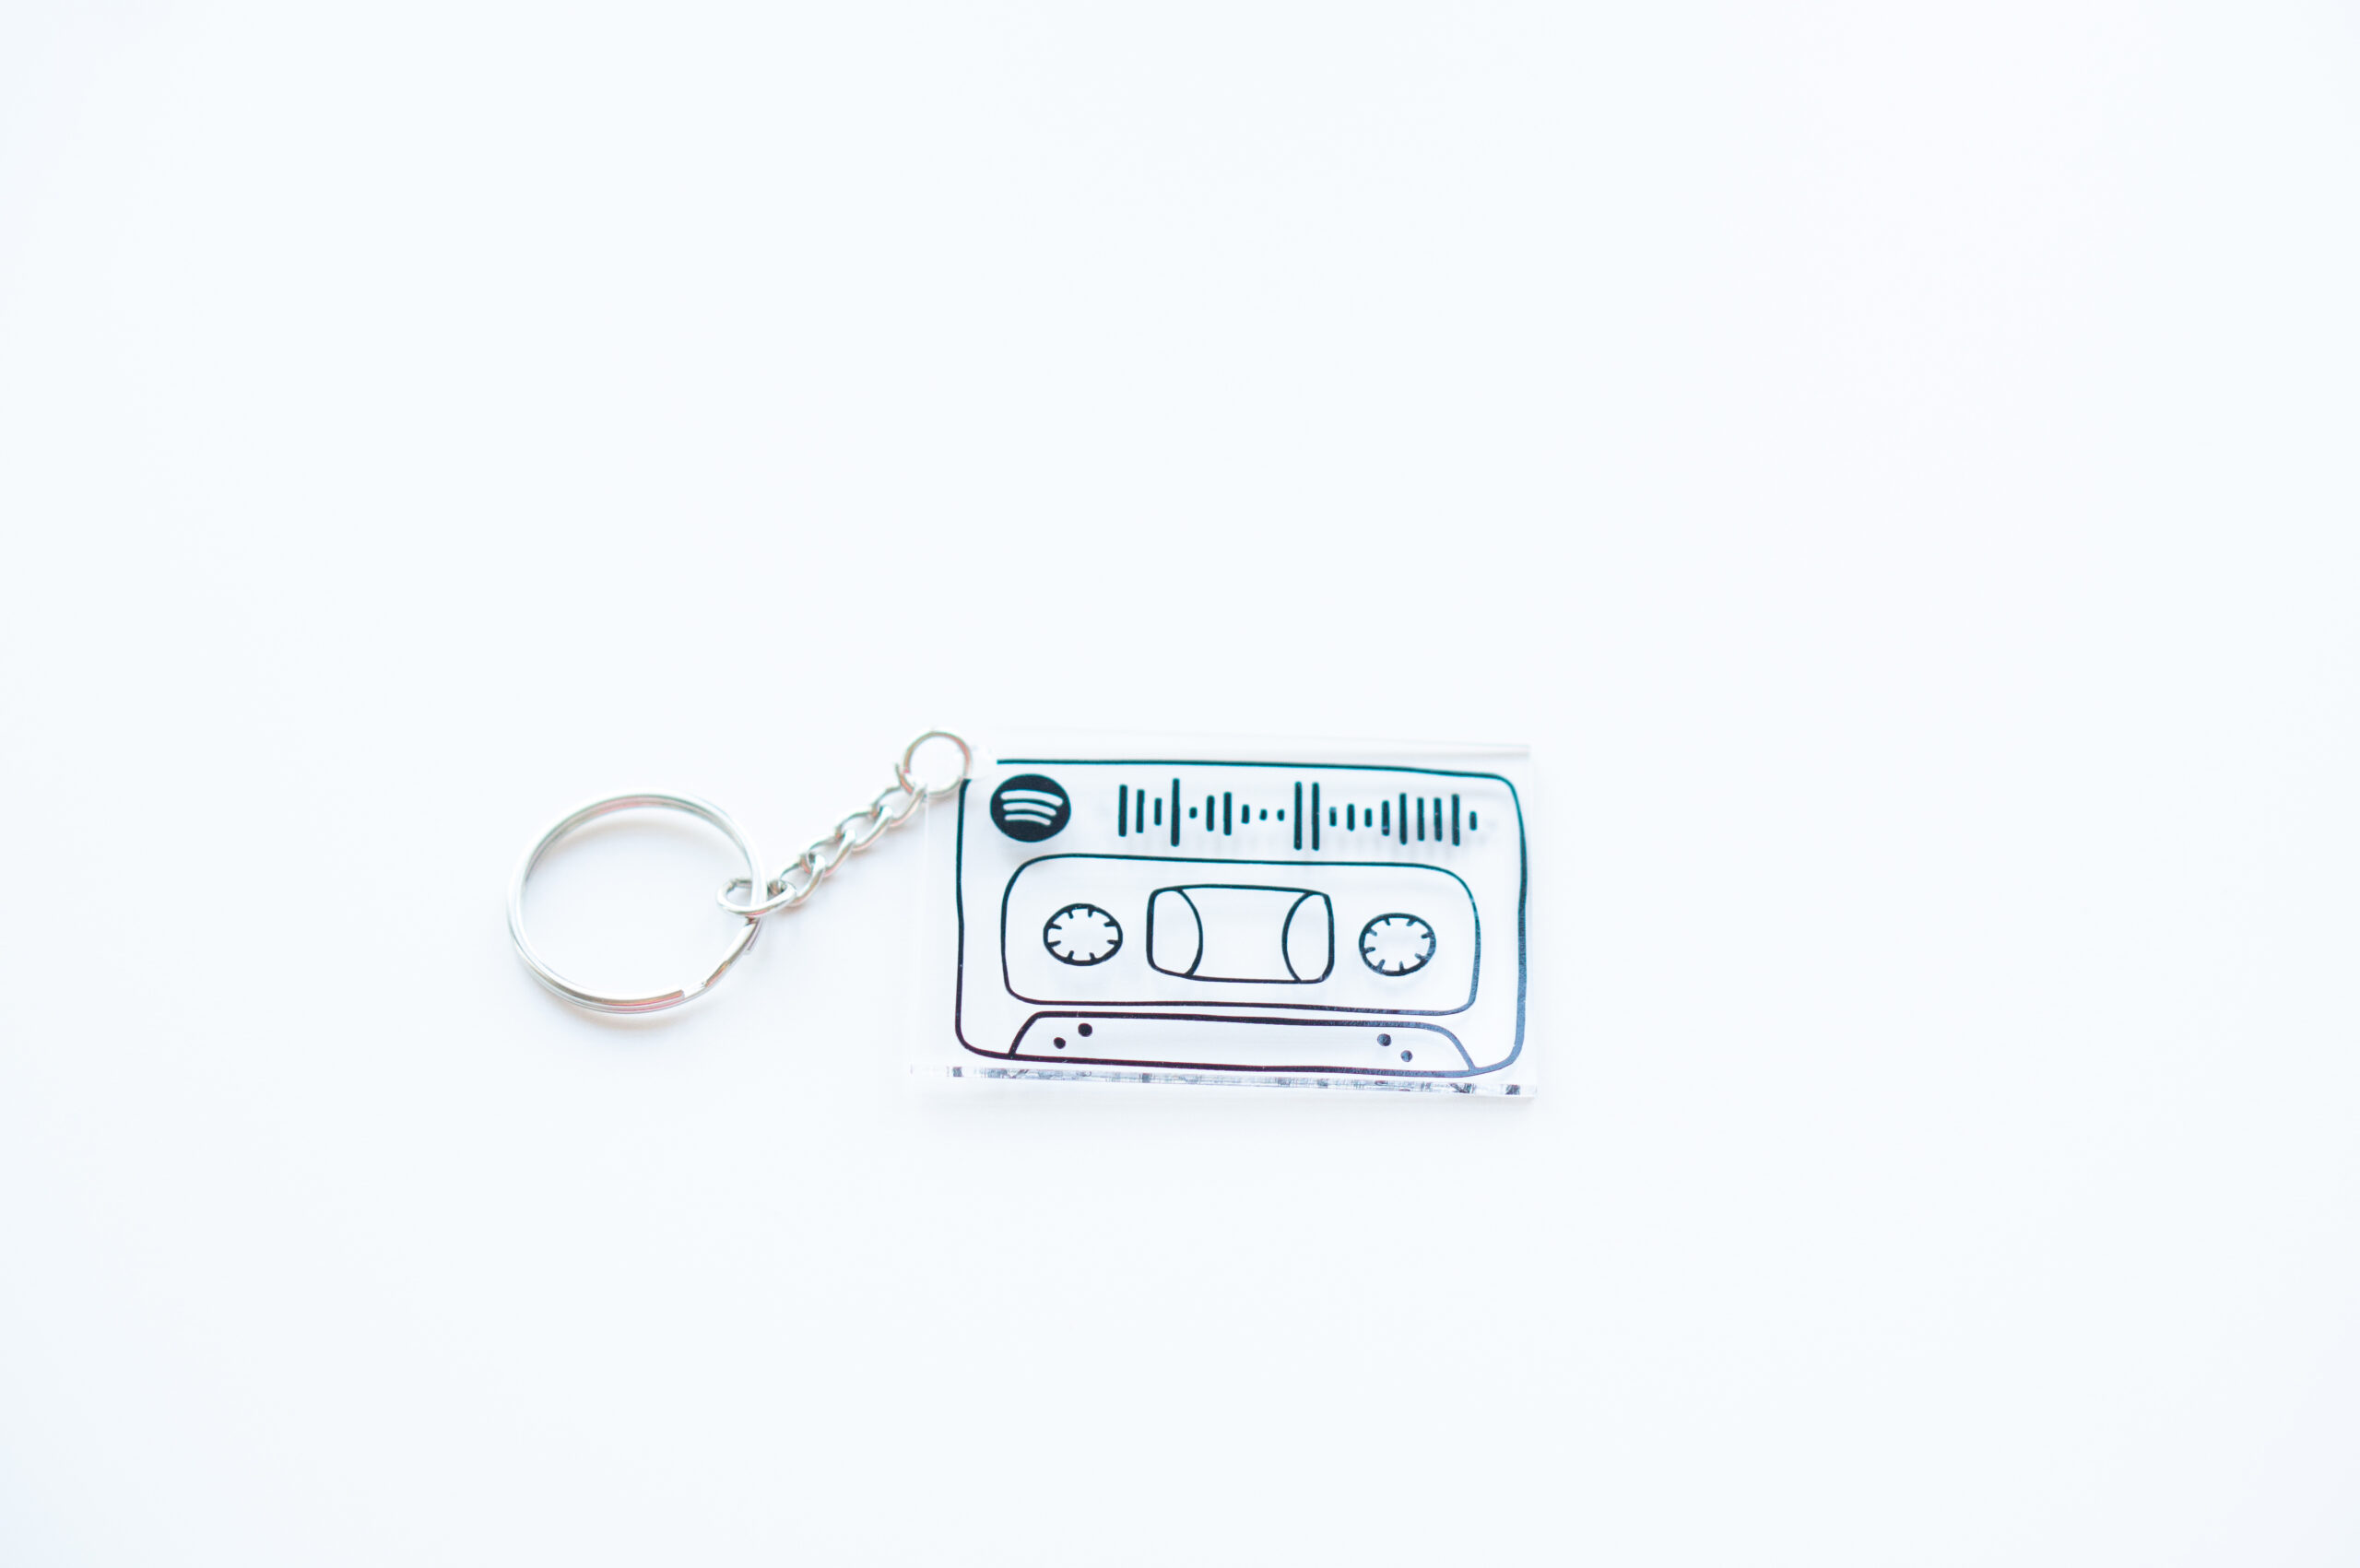 This image shows a song keychain DIY gift with a Spotify code.